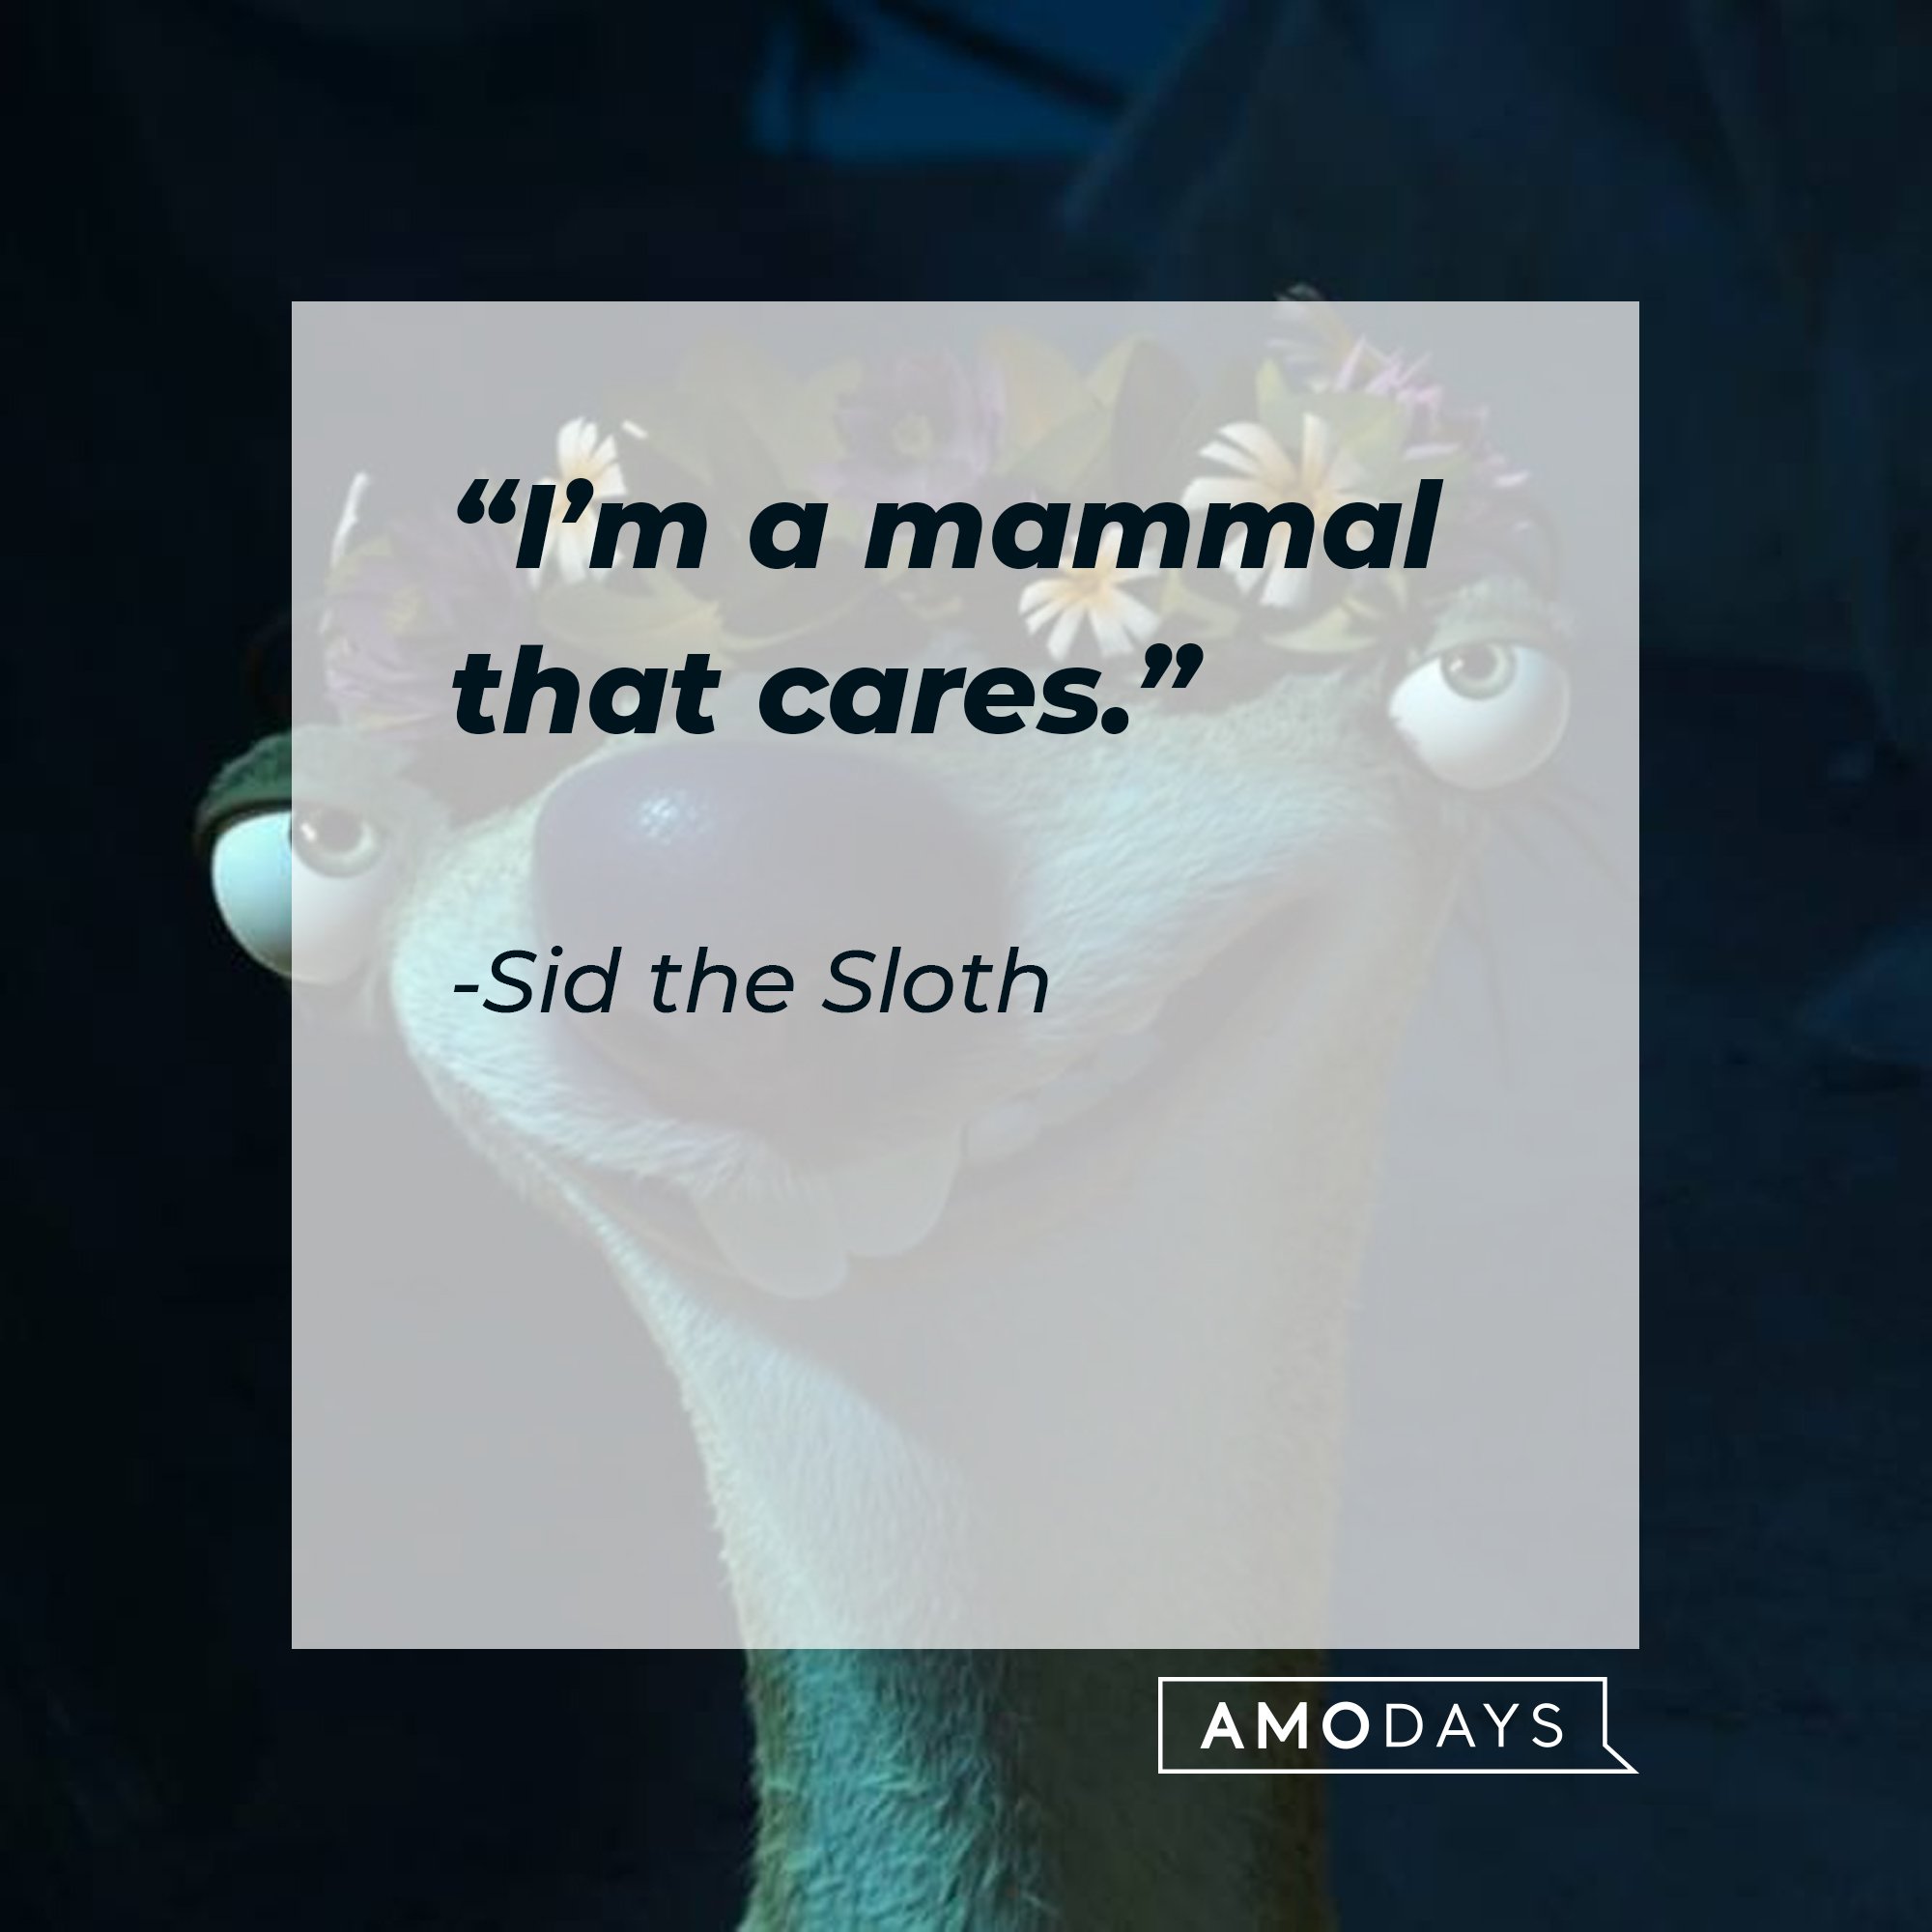 Sid the Sloth's quote:  “I’m a mammal that cares.” | Image: AmoDays